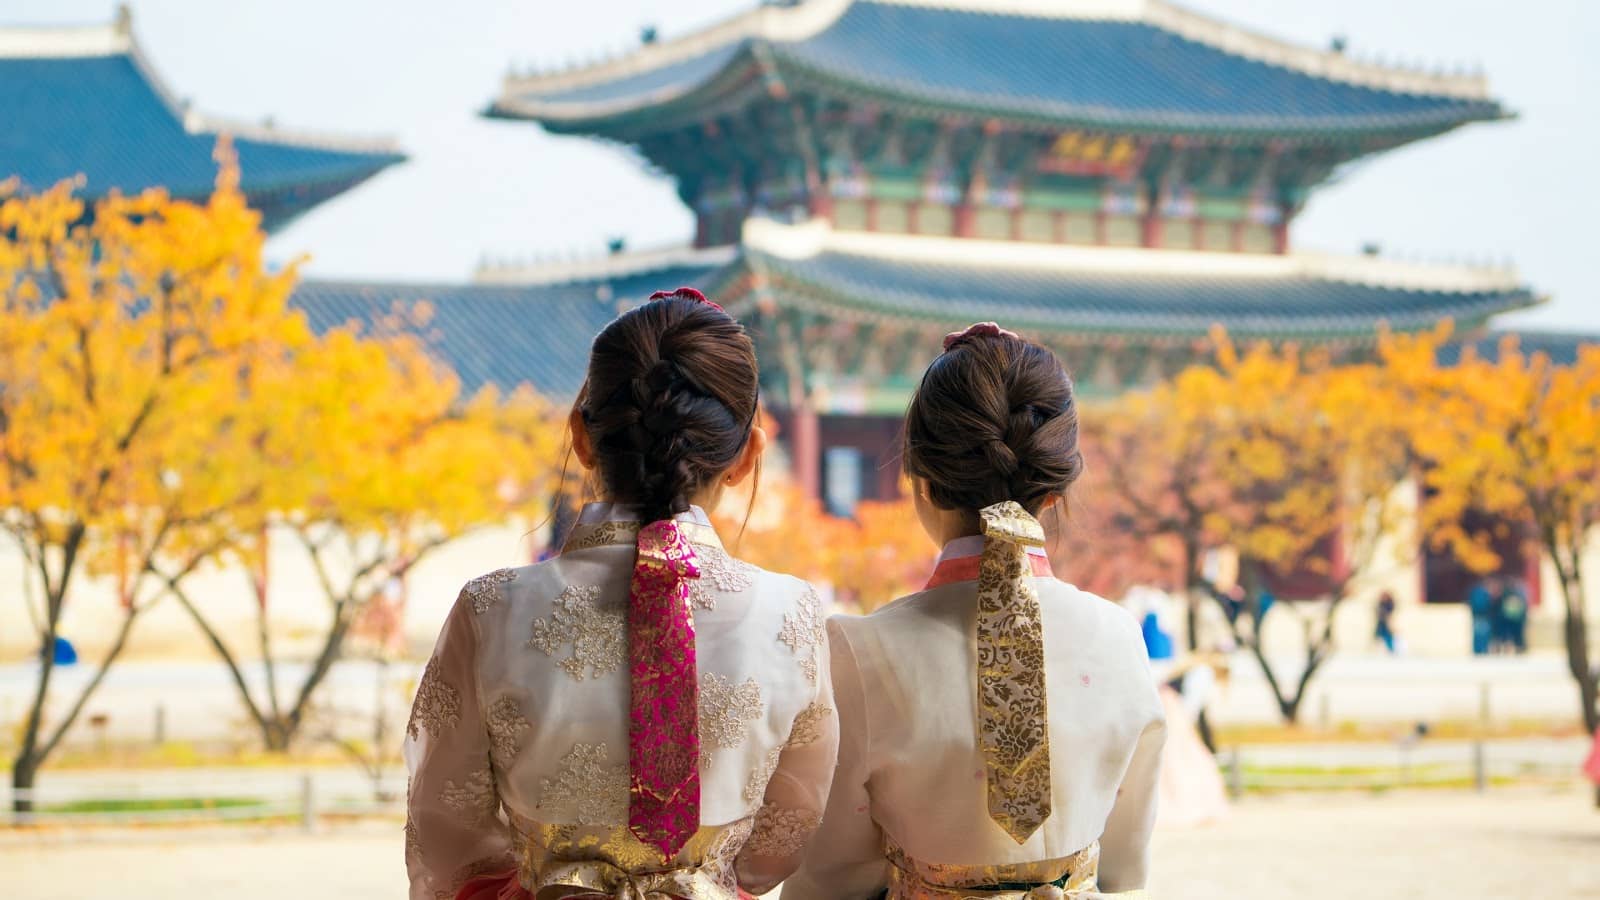 Understand the imbedded culture in South Korea